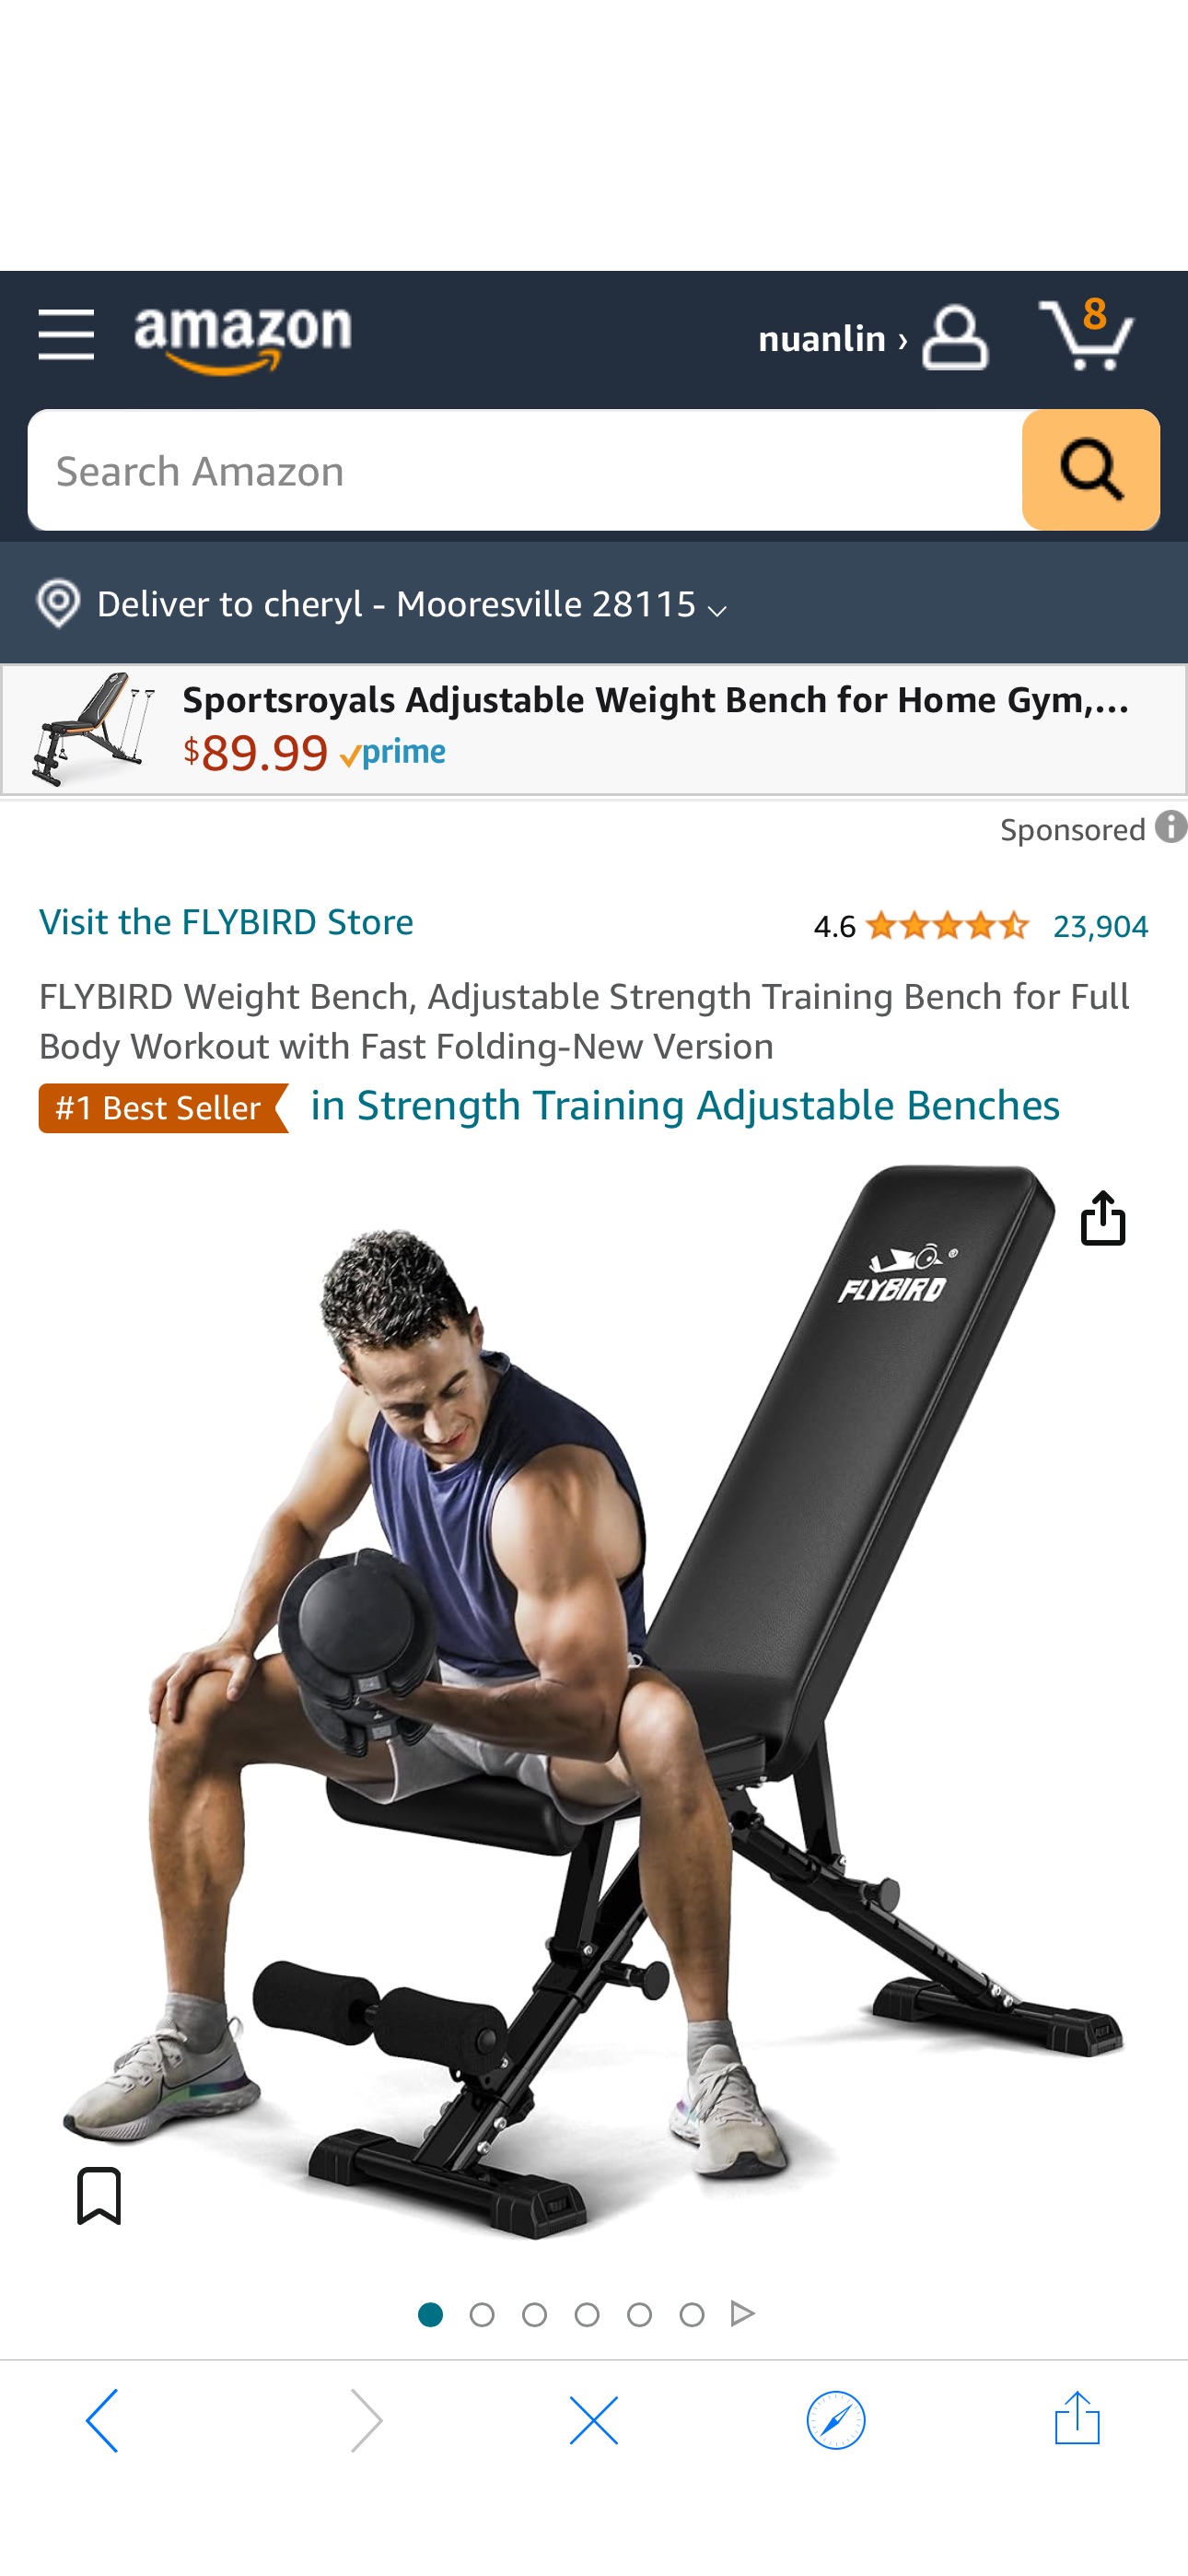 Amazon.com : FLYBIRD Weight Bench, Adjustable Strength Training Bench for Full Body Workout with Fast Folding-New Version : Sports & Outdoors